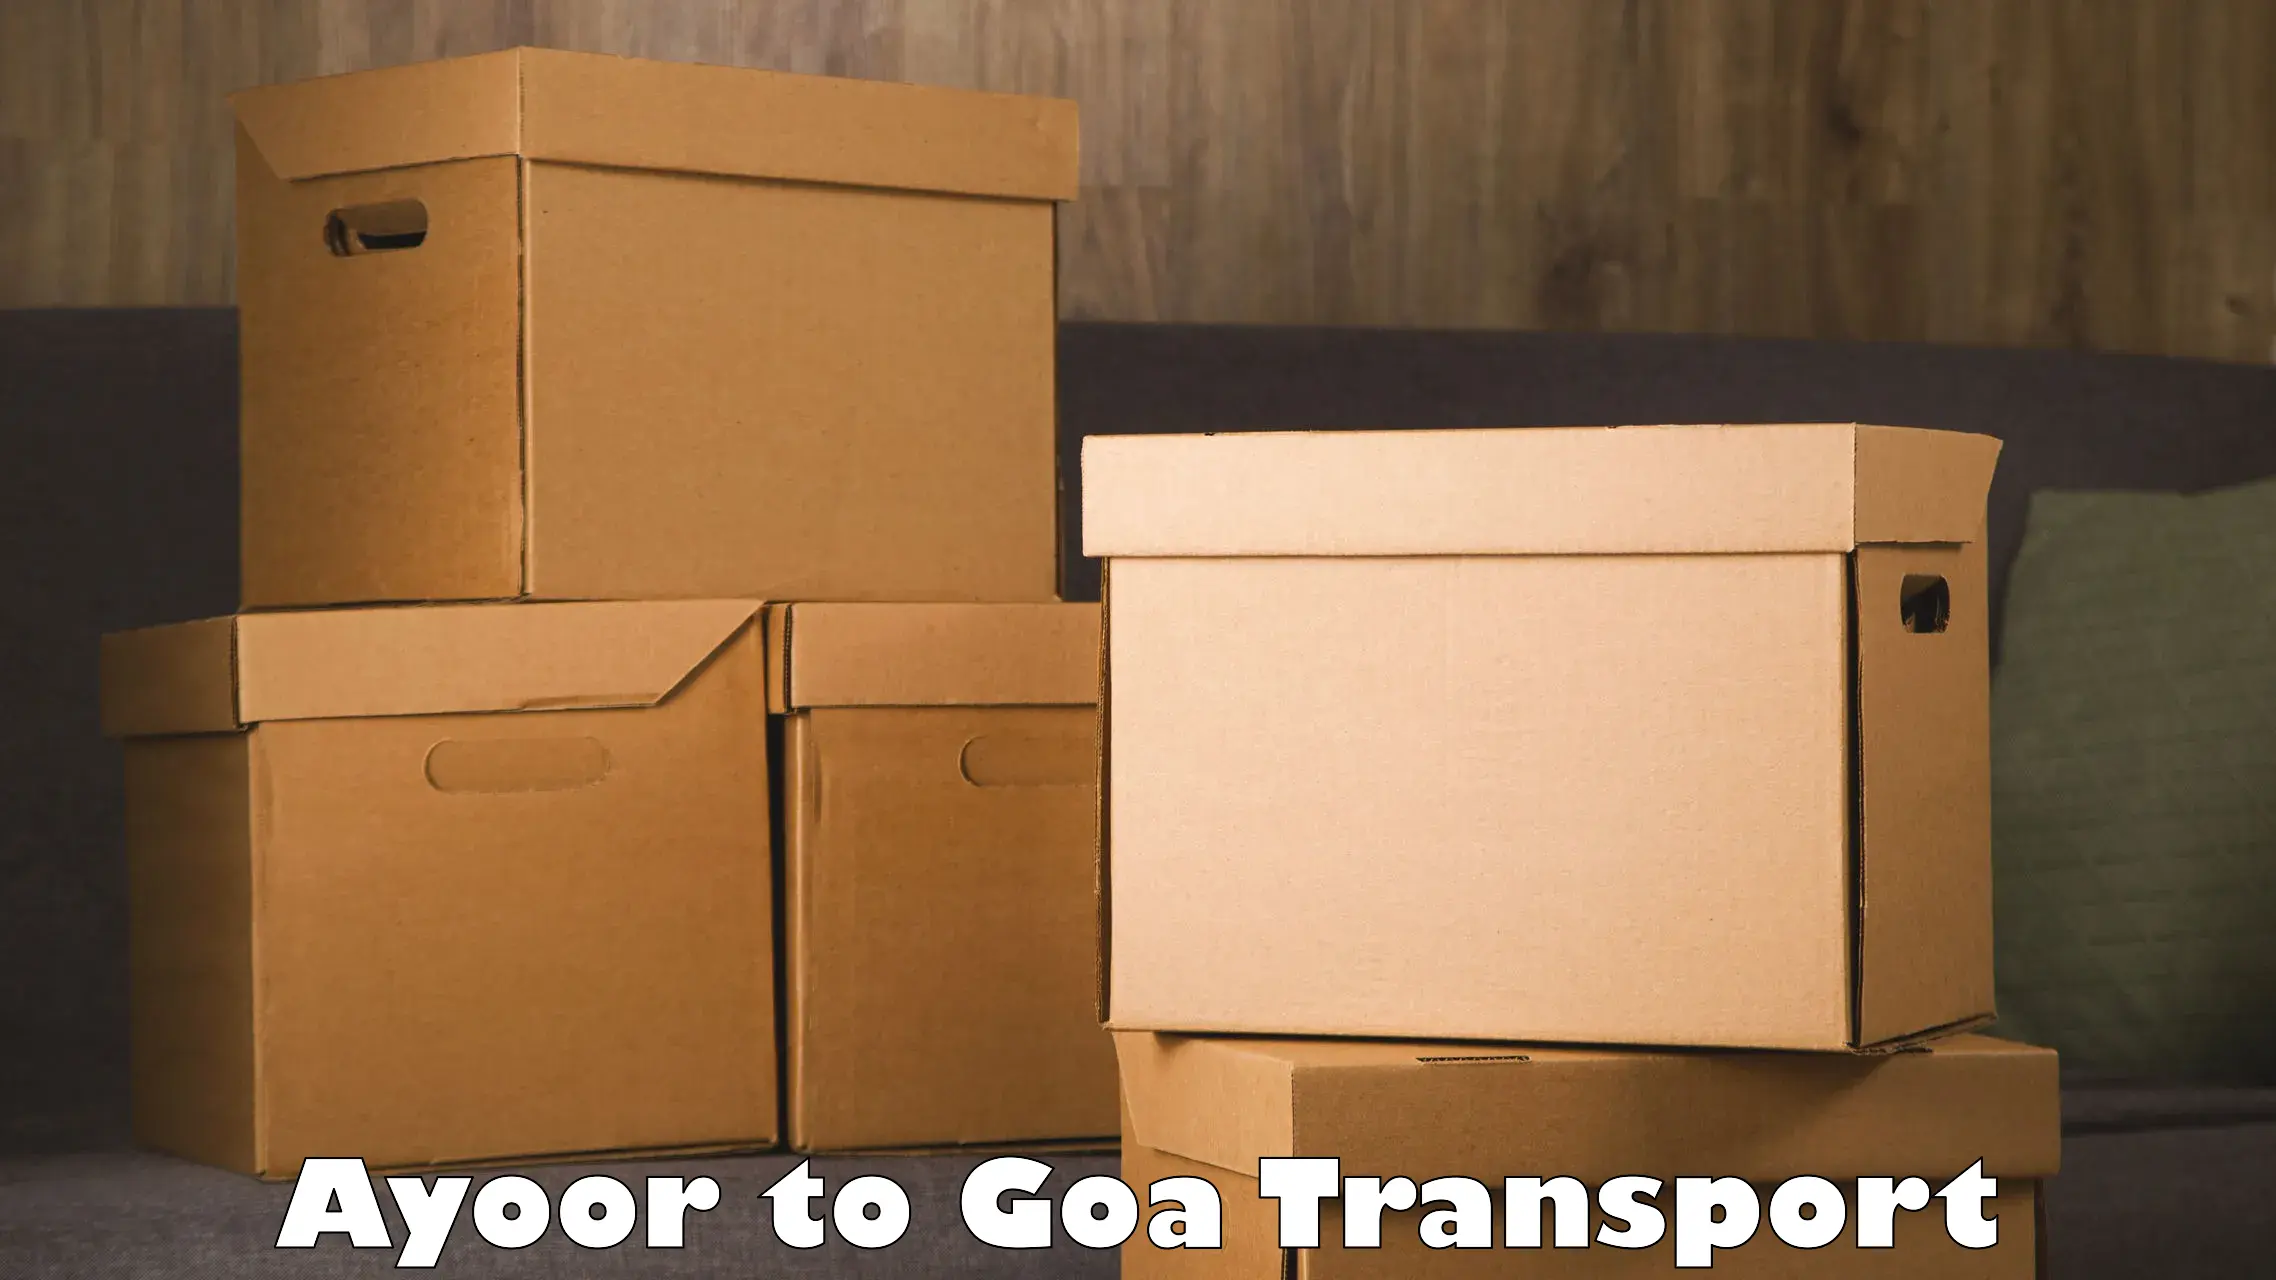 Nearby transport service Ayoor to Goa